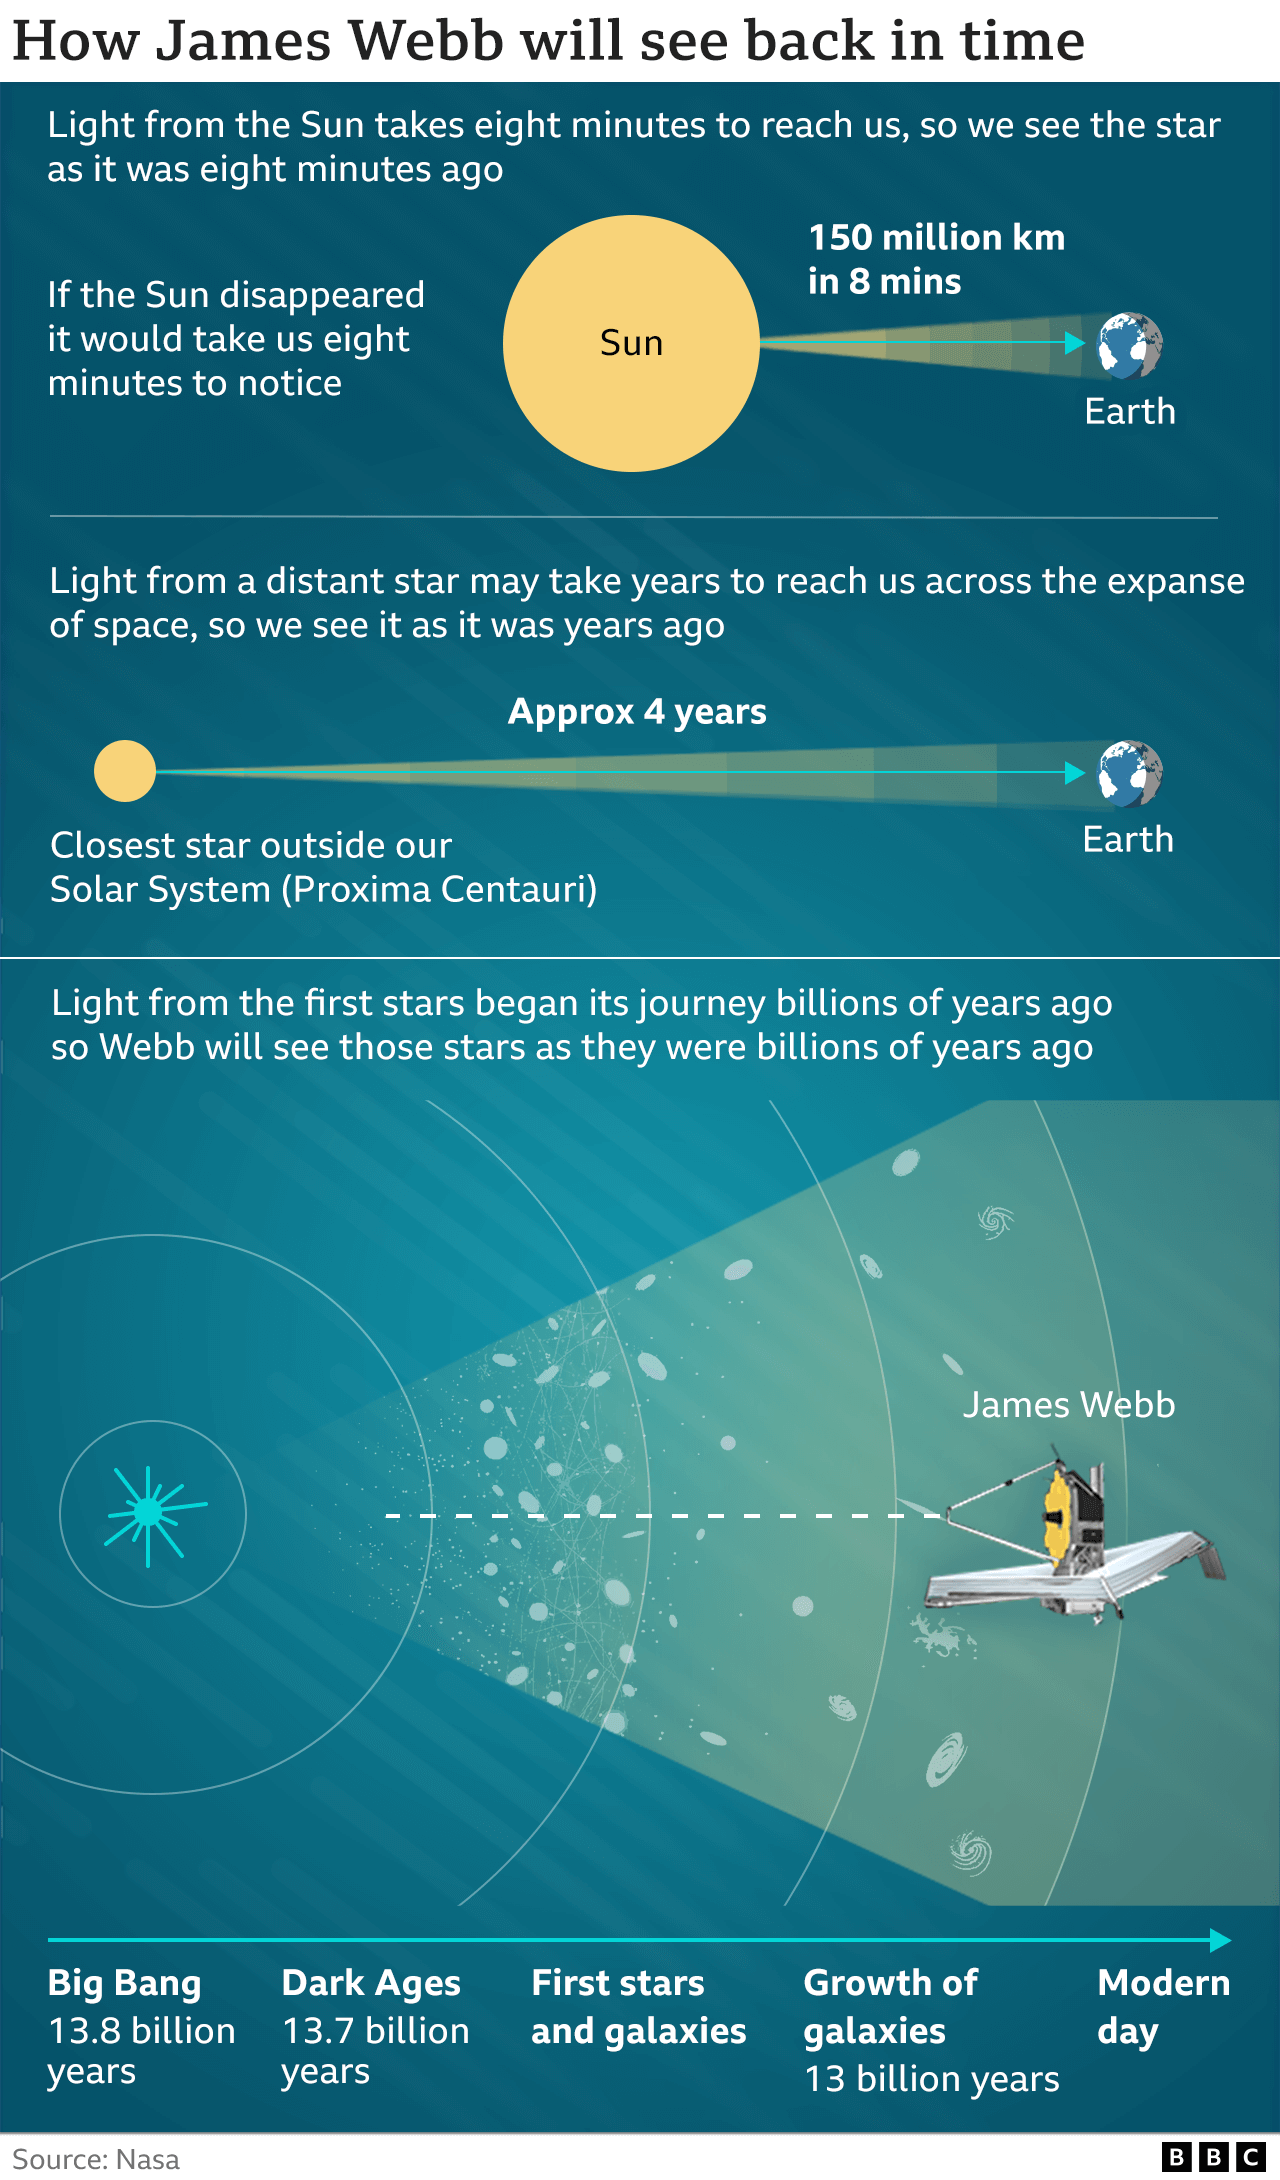 How telescope will see back in time